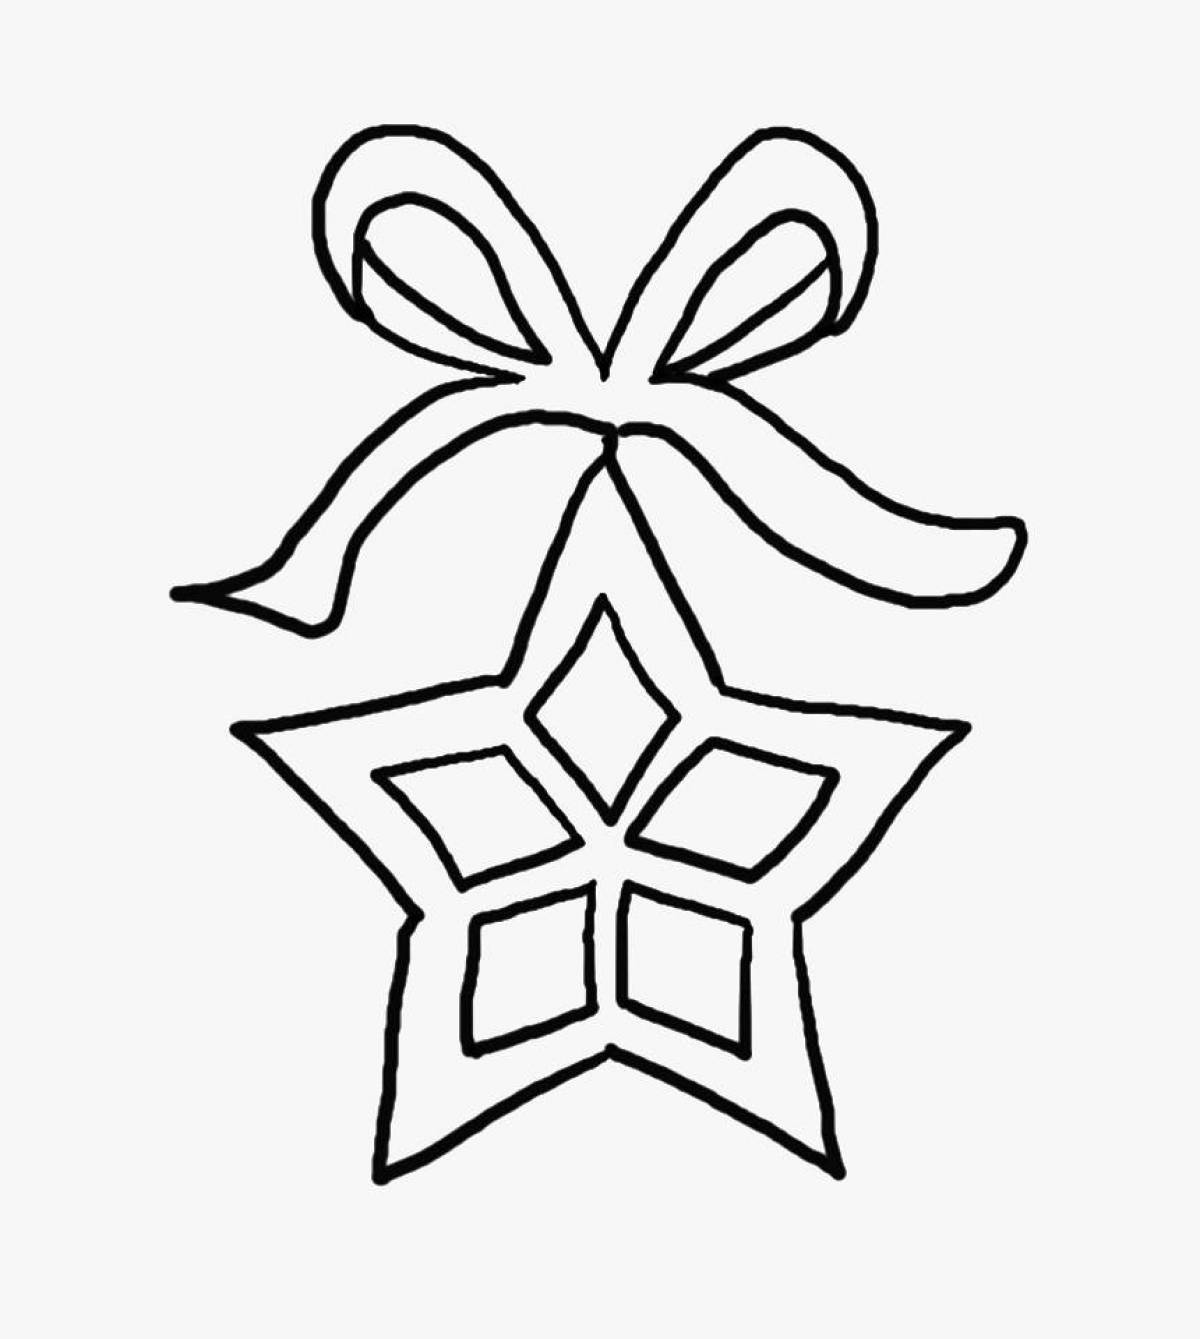 Glitter Christmas star coloring page